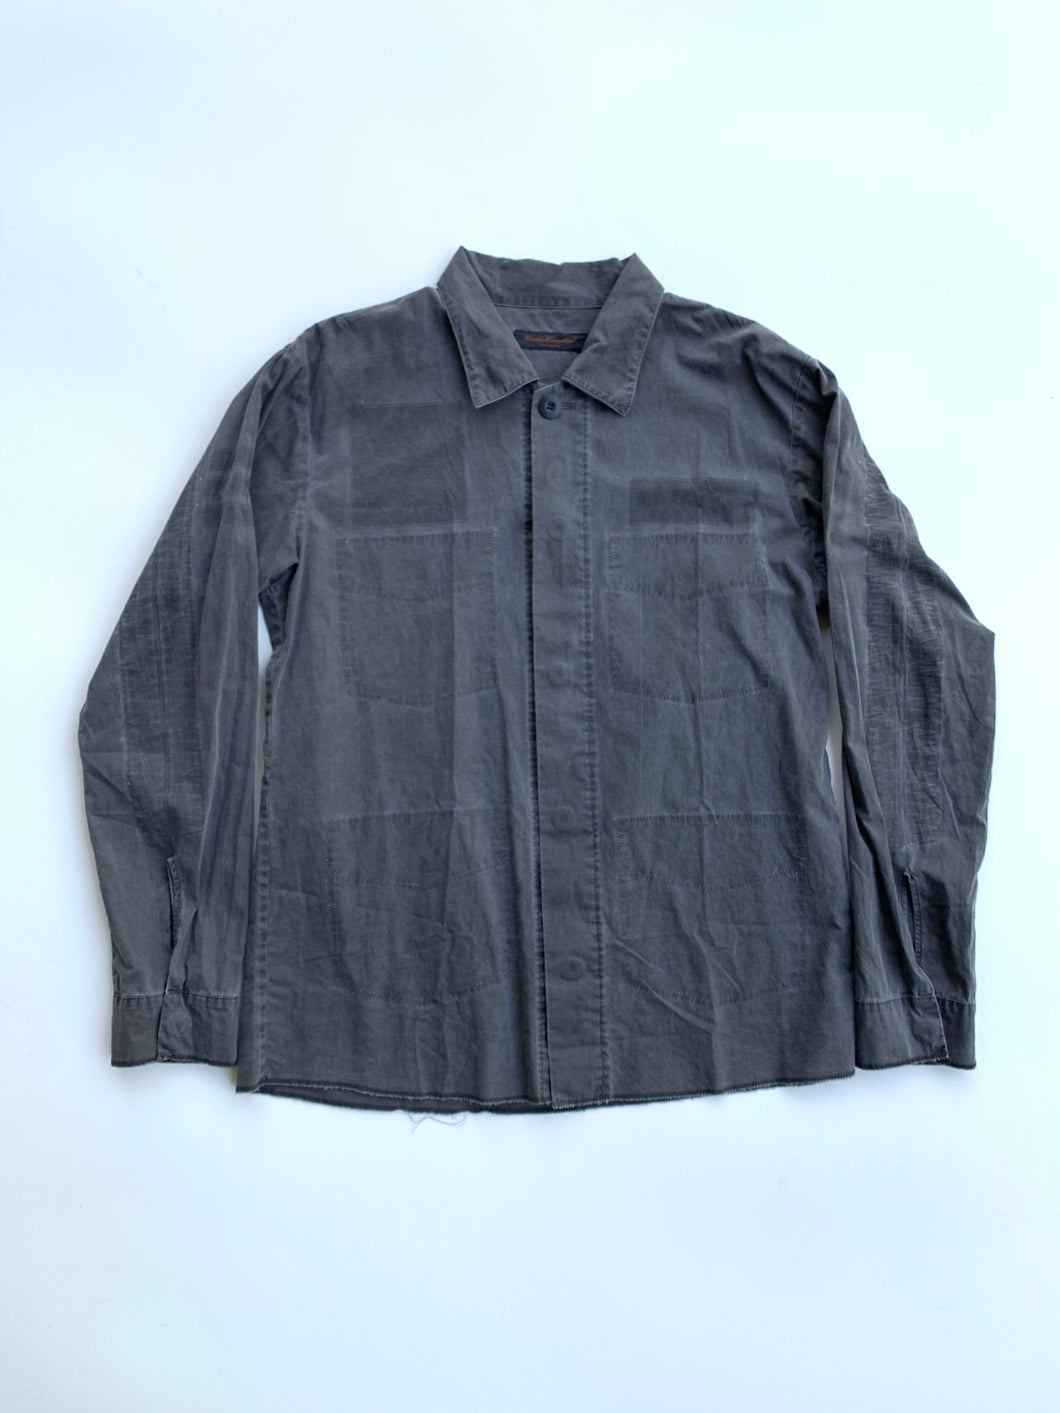 Undercover “Scab” Button Up